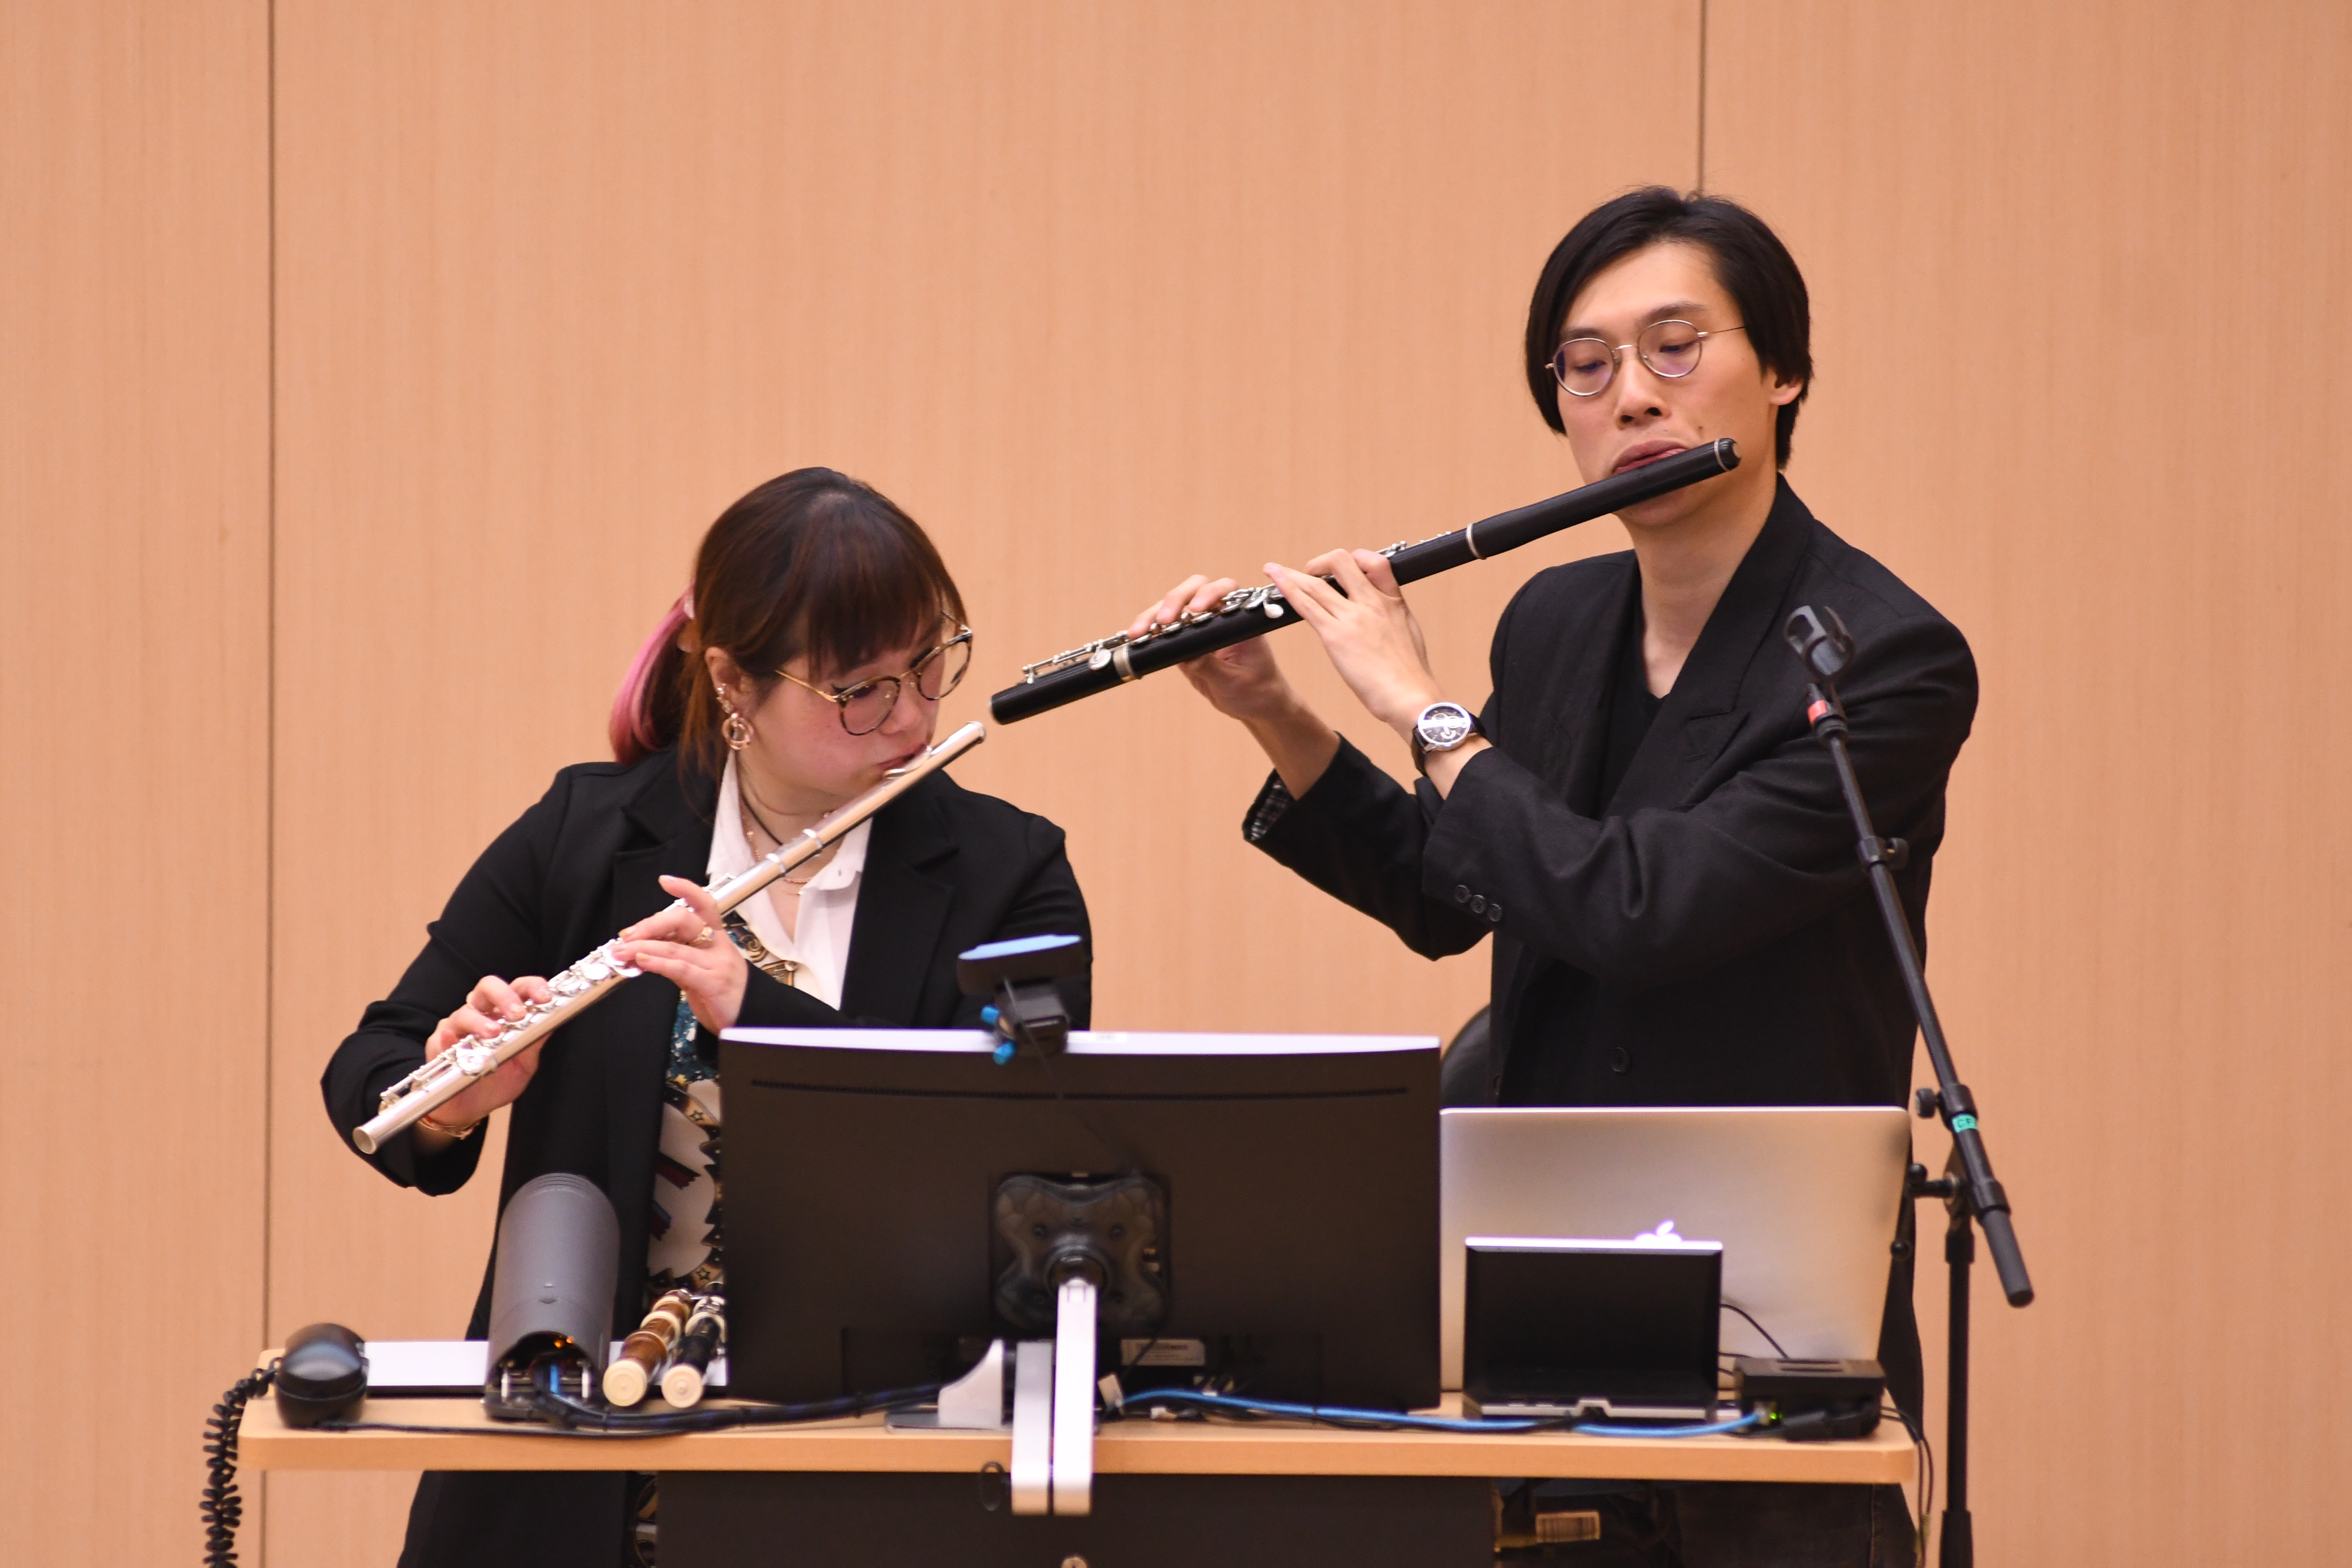 HKUST Arts Festival 2023 - The Evolution of Flute from Baroque to Modern Periods by TSANG Yat-ho